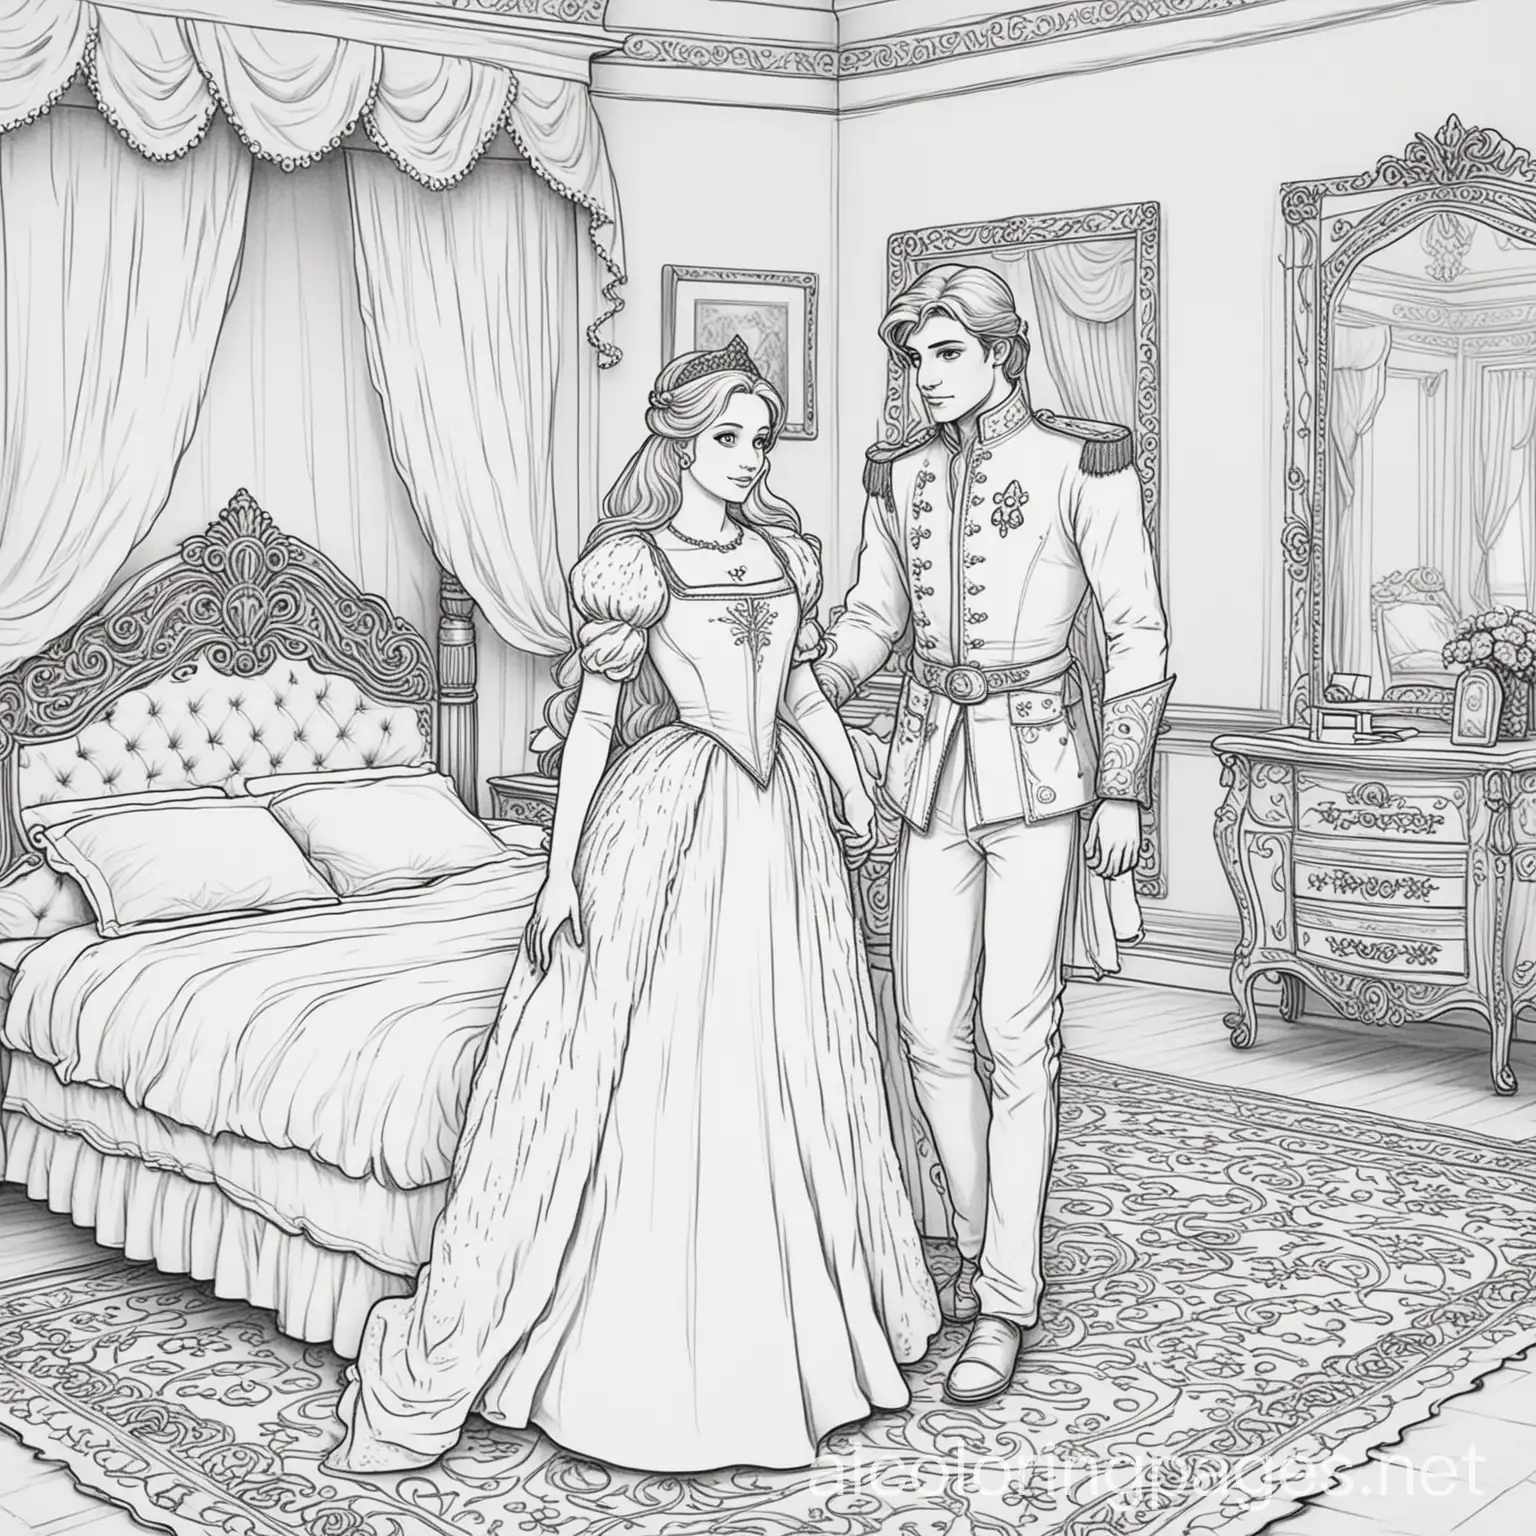 Young-Prince-and-Princess-Coloring-Page-in-Bedroom